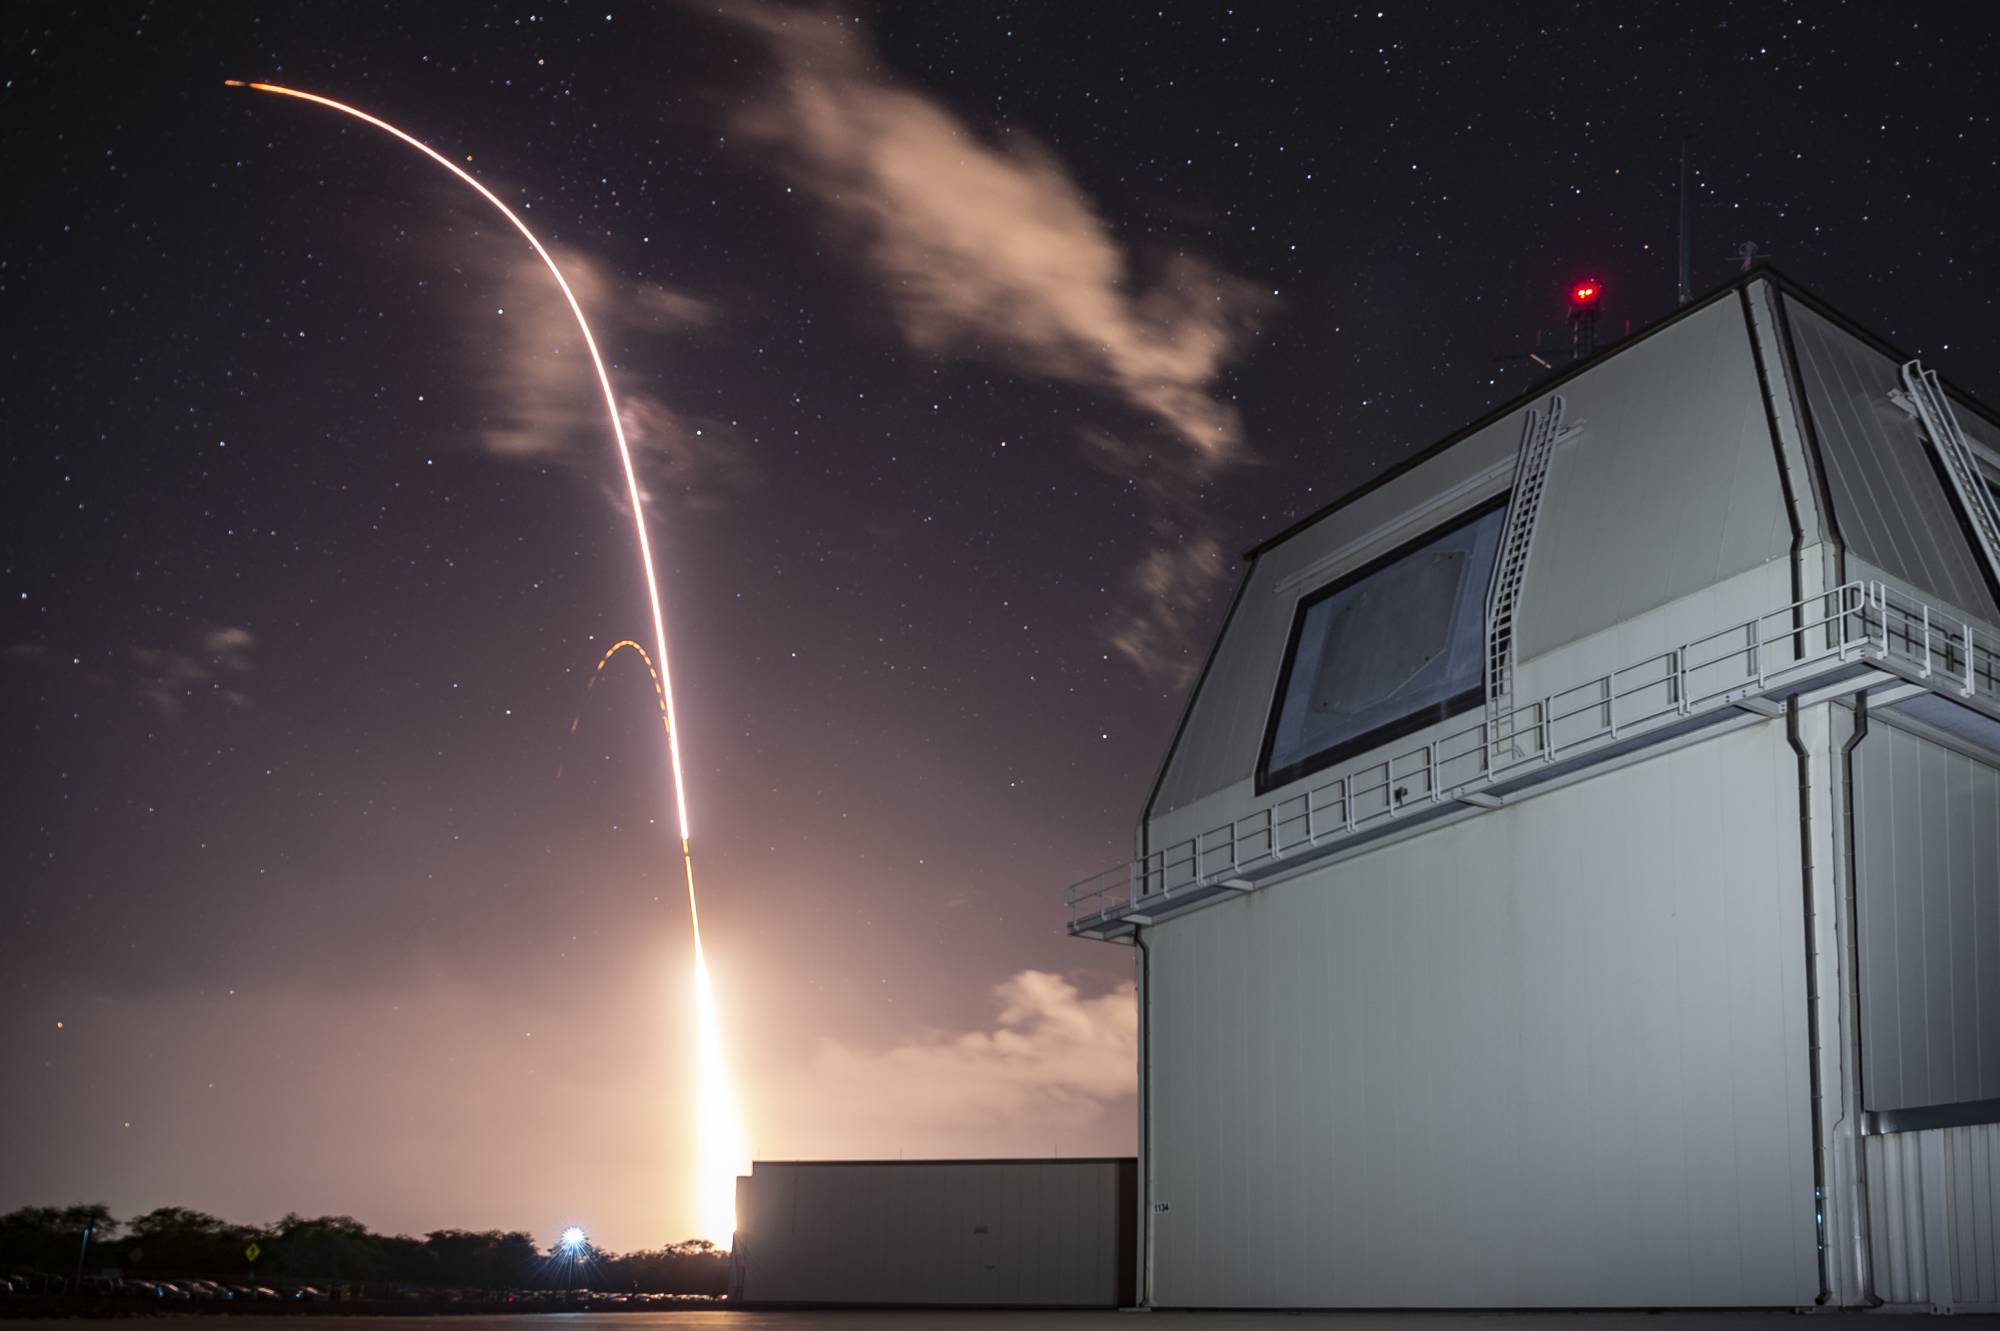 The Aegis Ashore Missile Defense Test Complex in Kauai, Hawaii, successfully conducts a flight test on Dec. 10, 2018. | MISSILE DEFENSE AGENCY